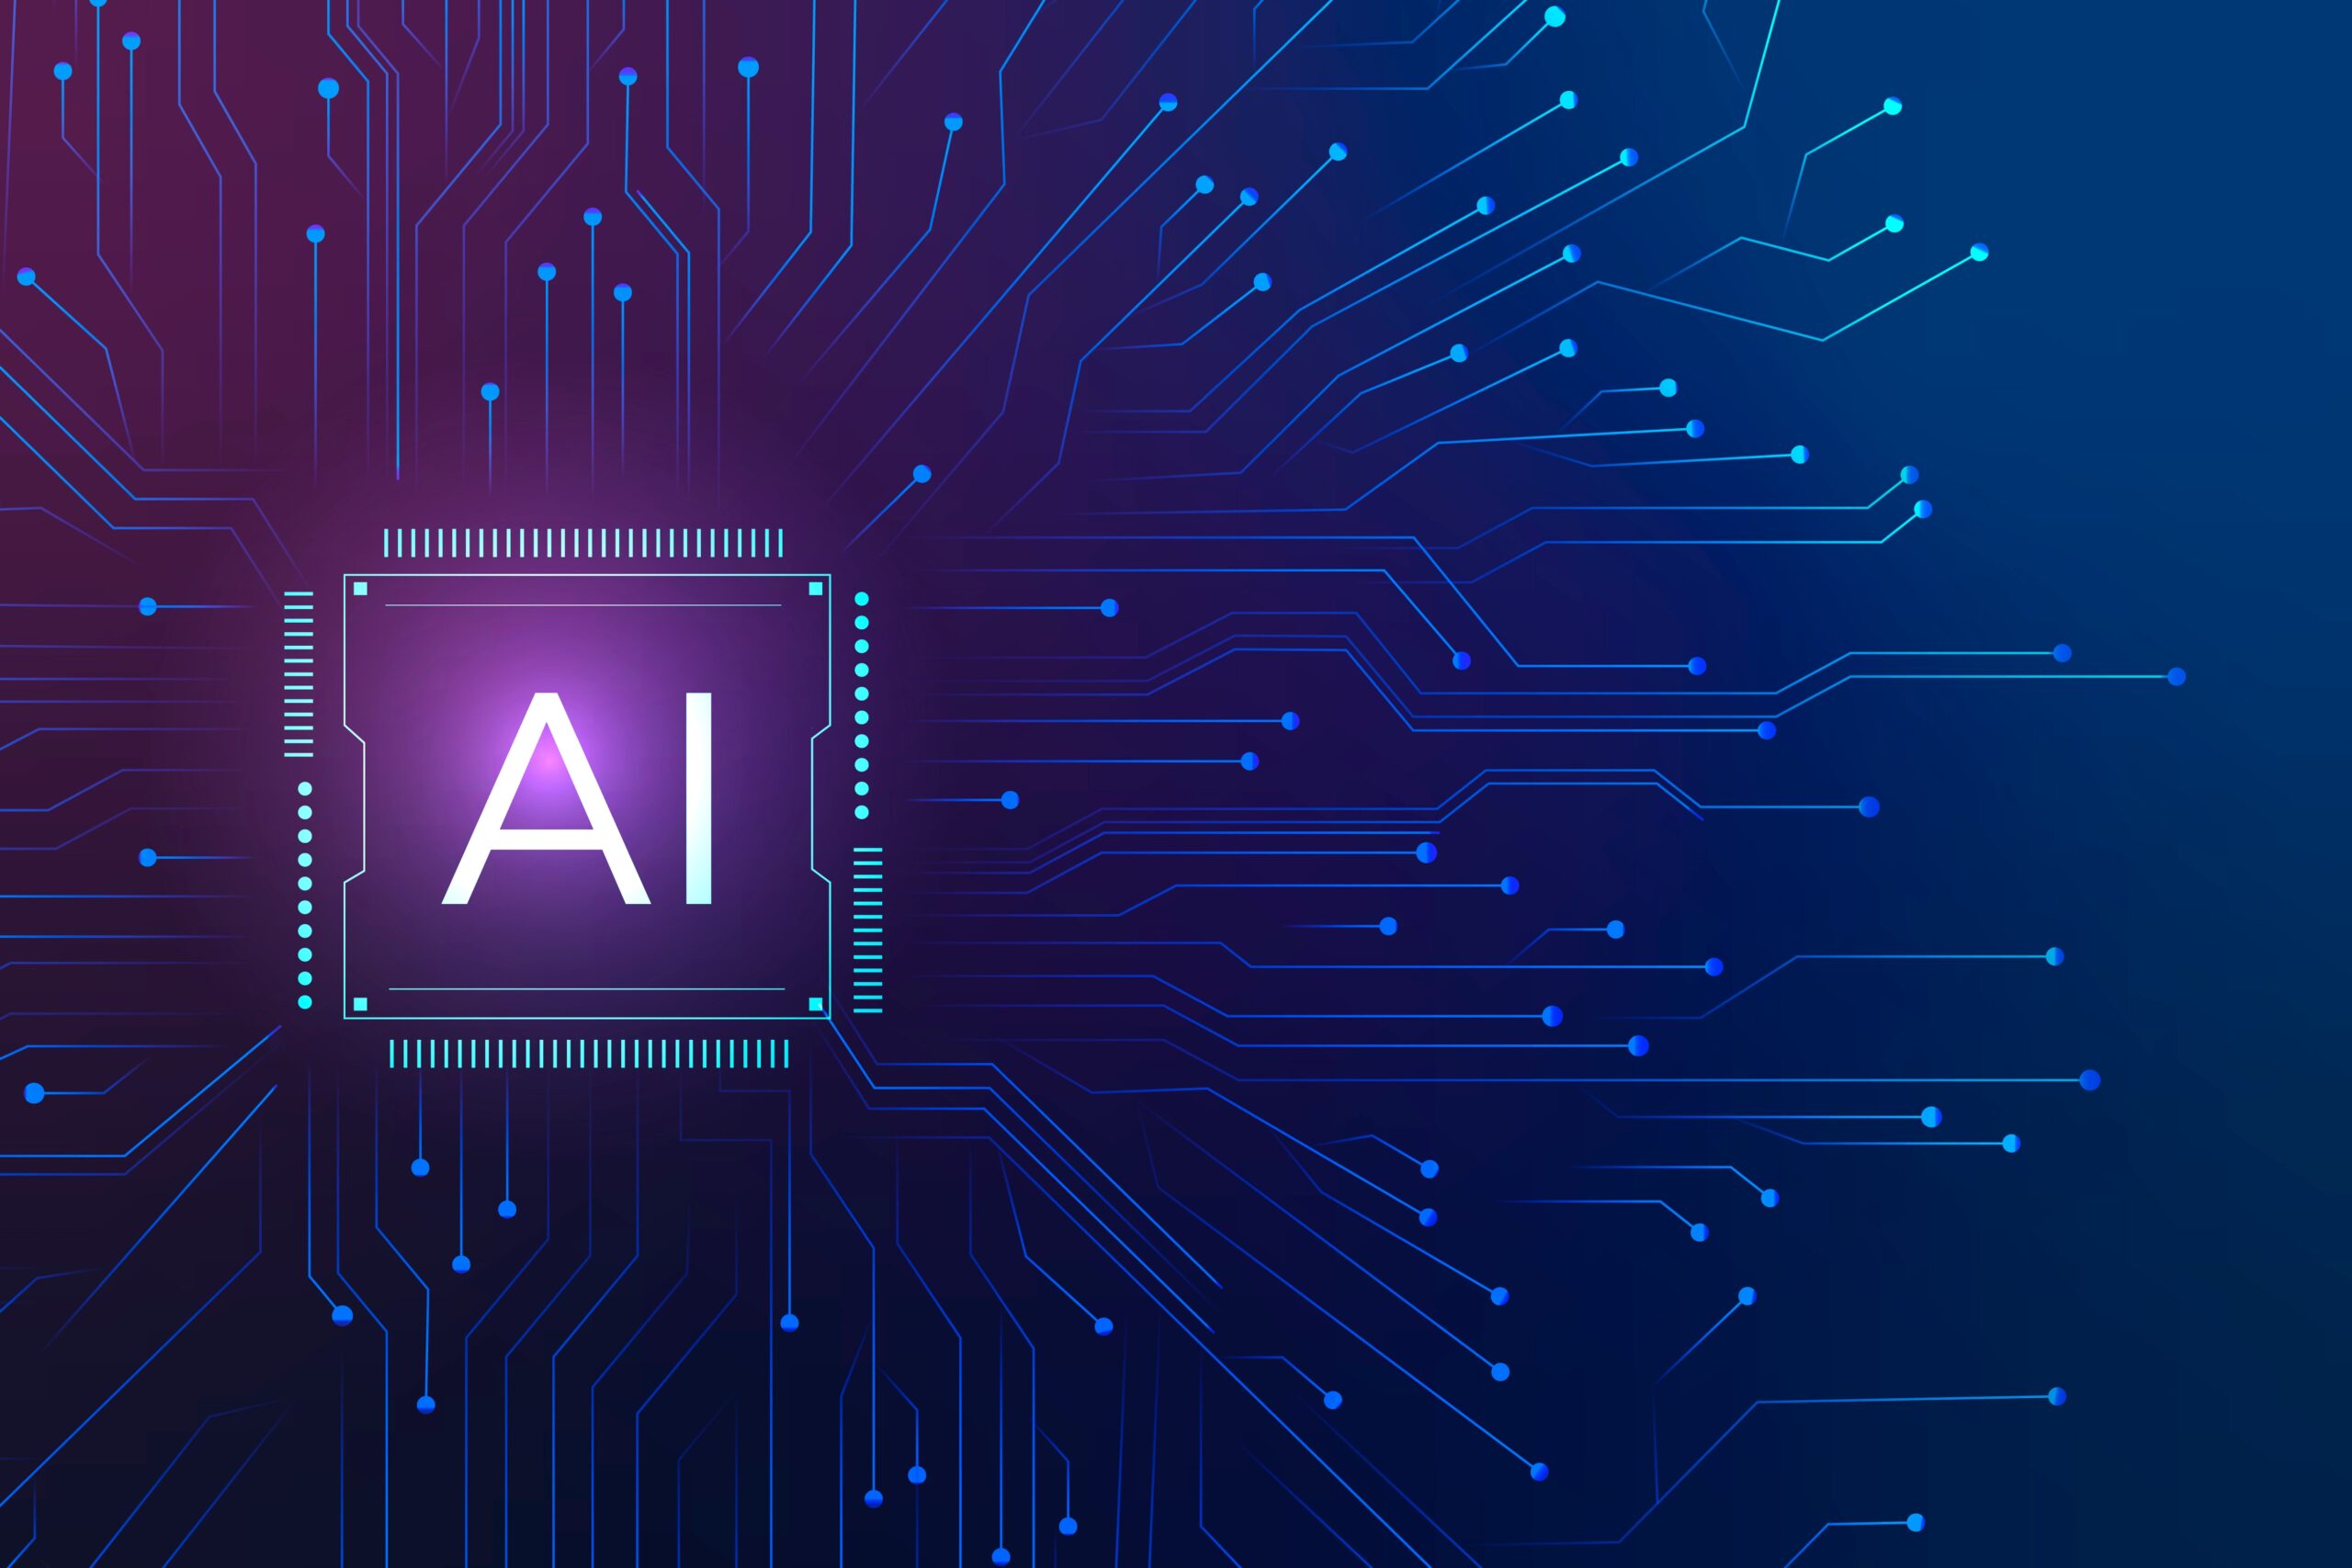 The National Academy of Medicine Unveils Draft Code for Responsible AI in Healthcare